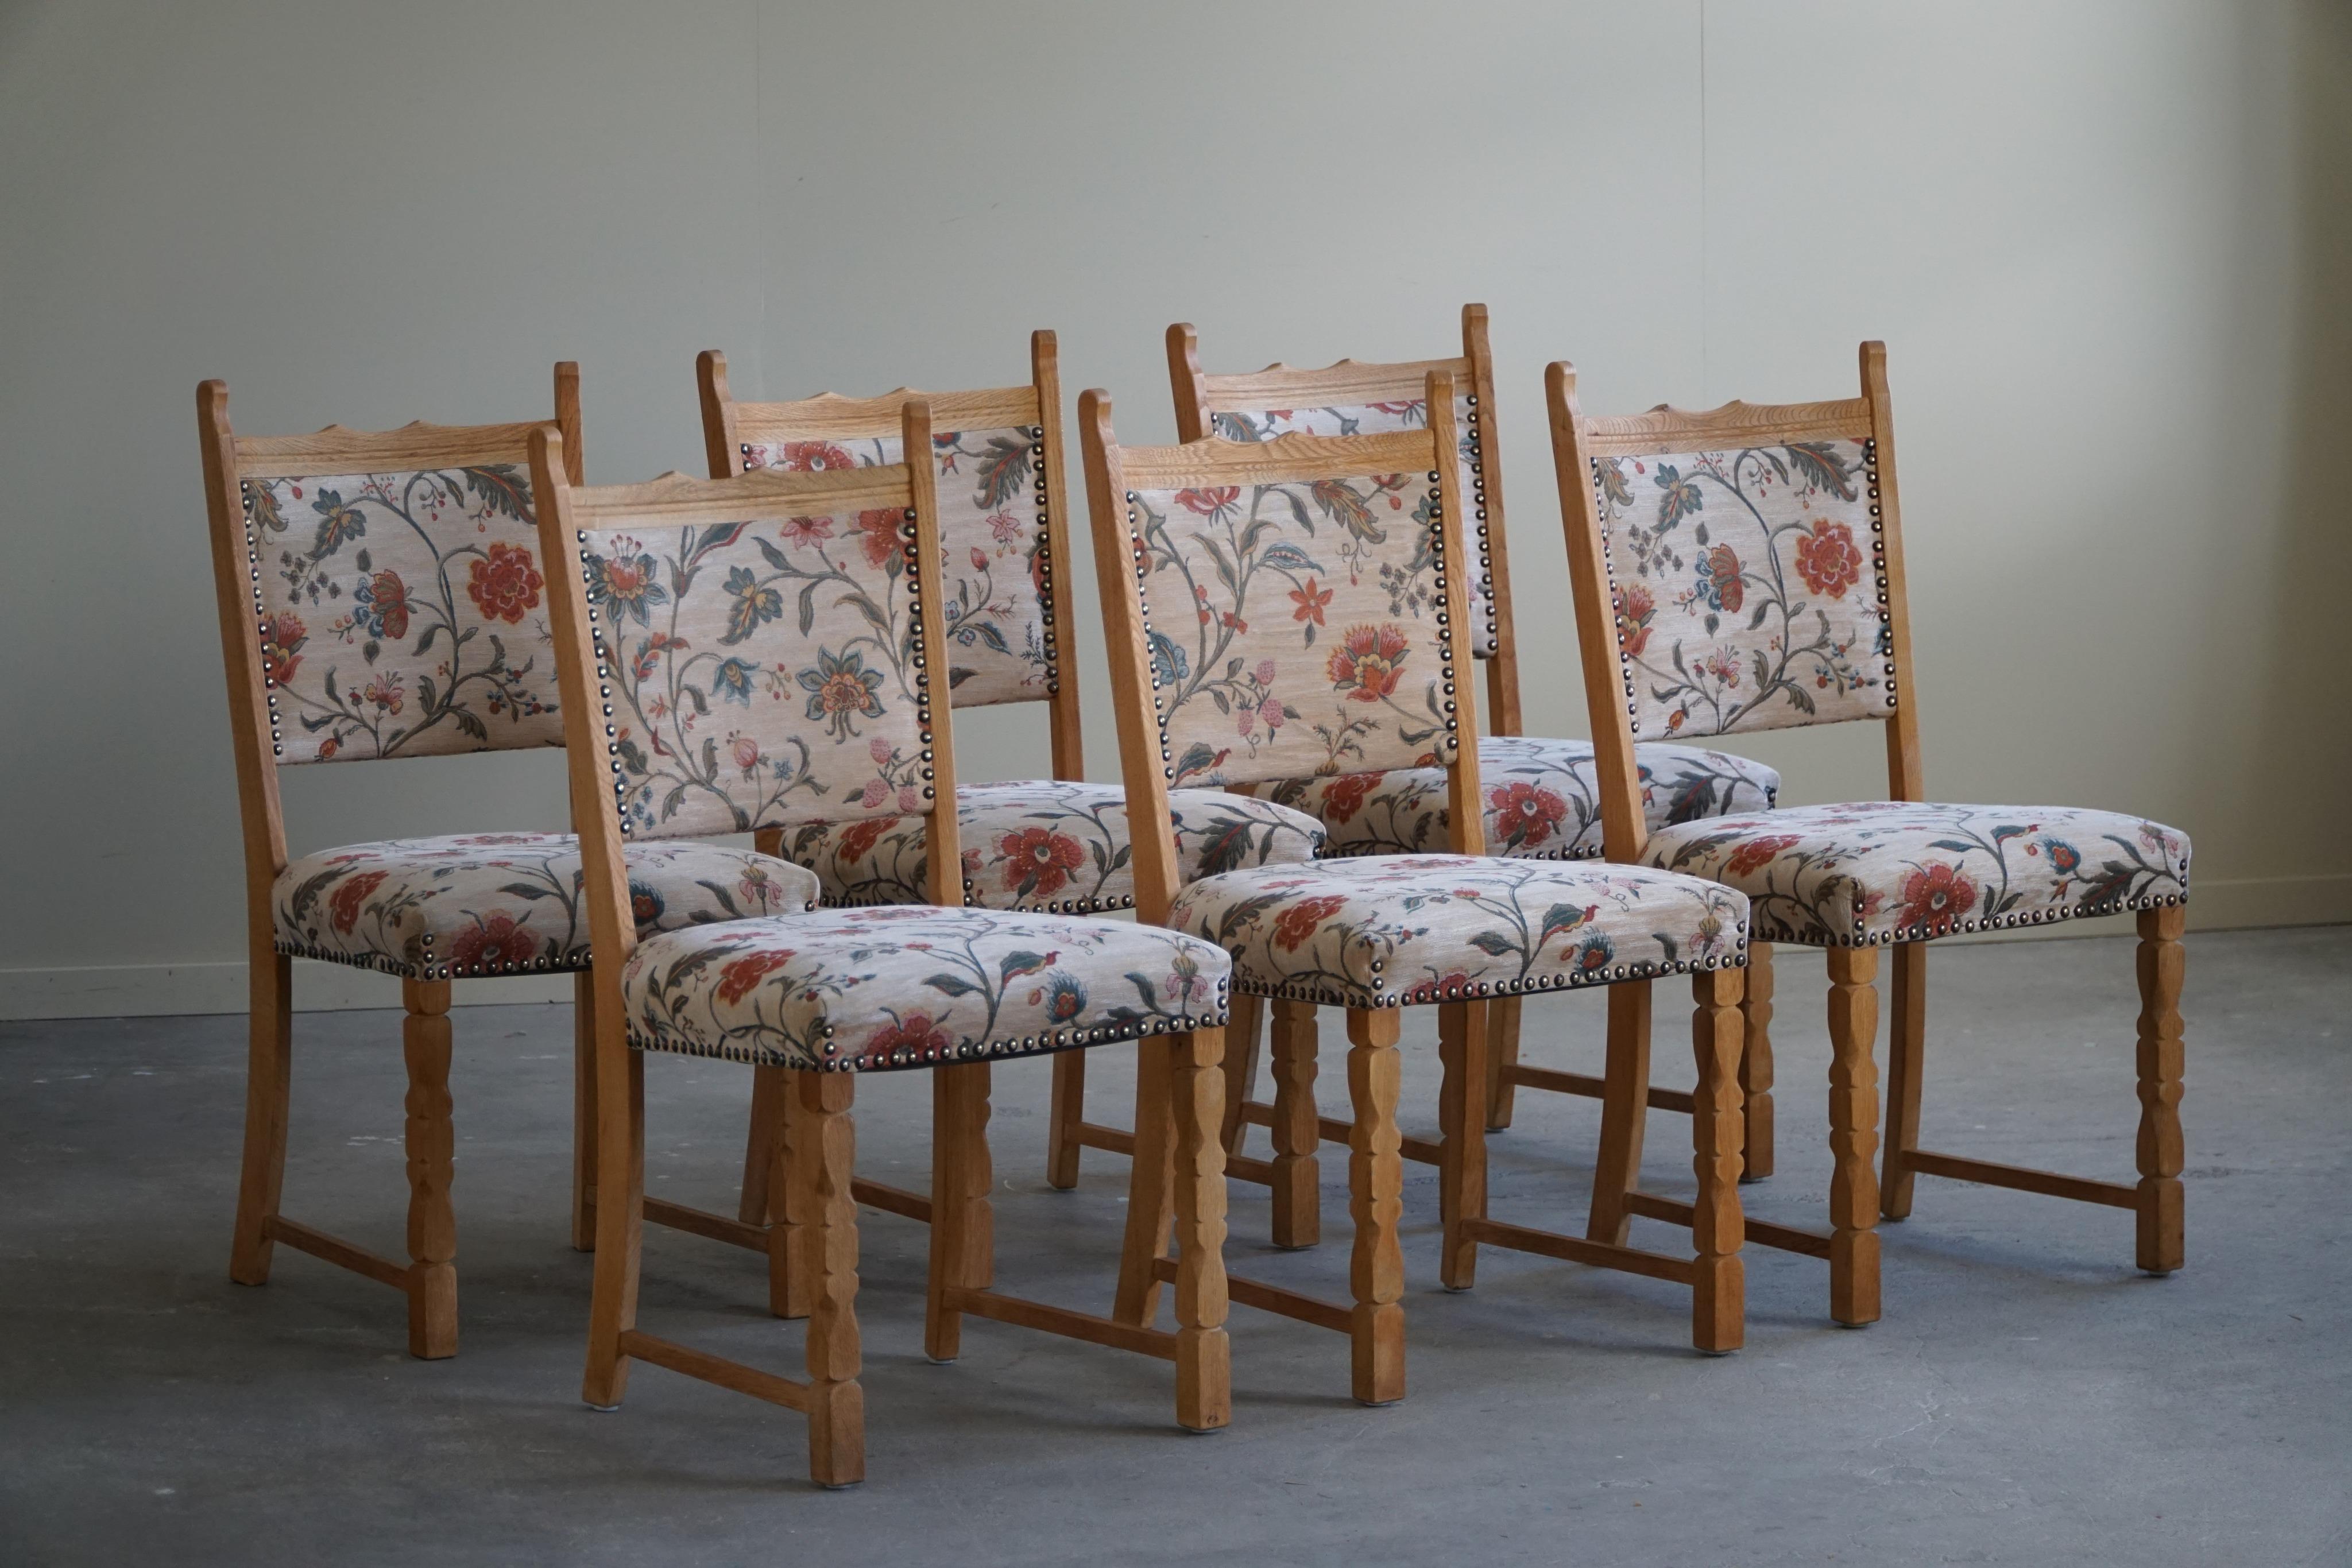 A Set of 6 Dining Room Chairs in Oak & Fabric by a Danish Cabinetmaker, 1950s For Sale 9